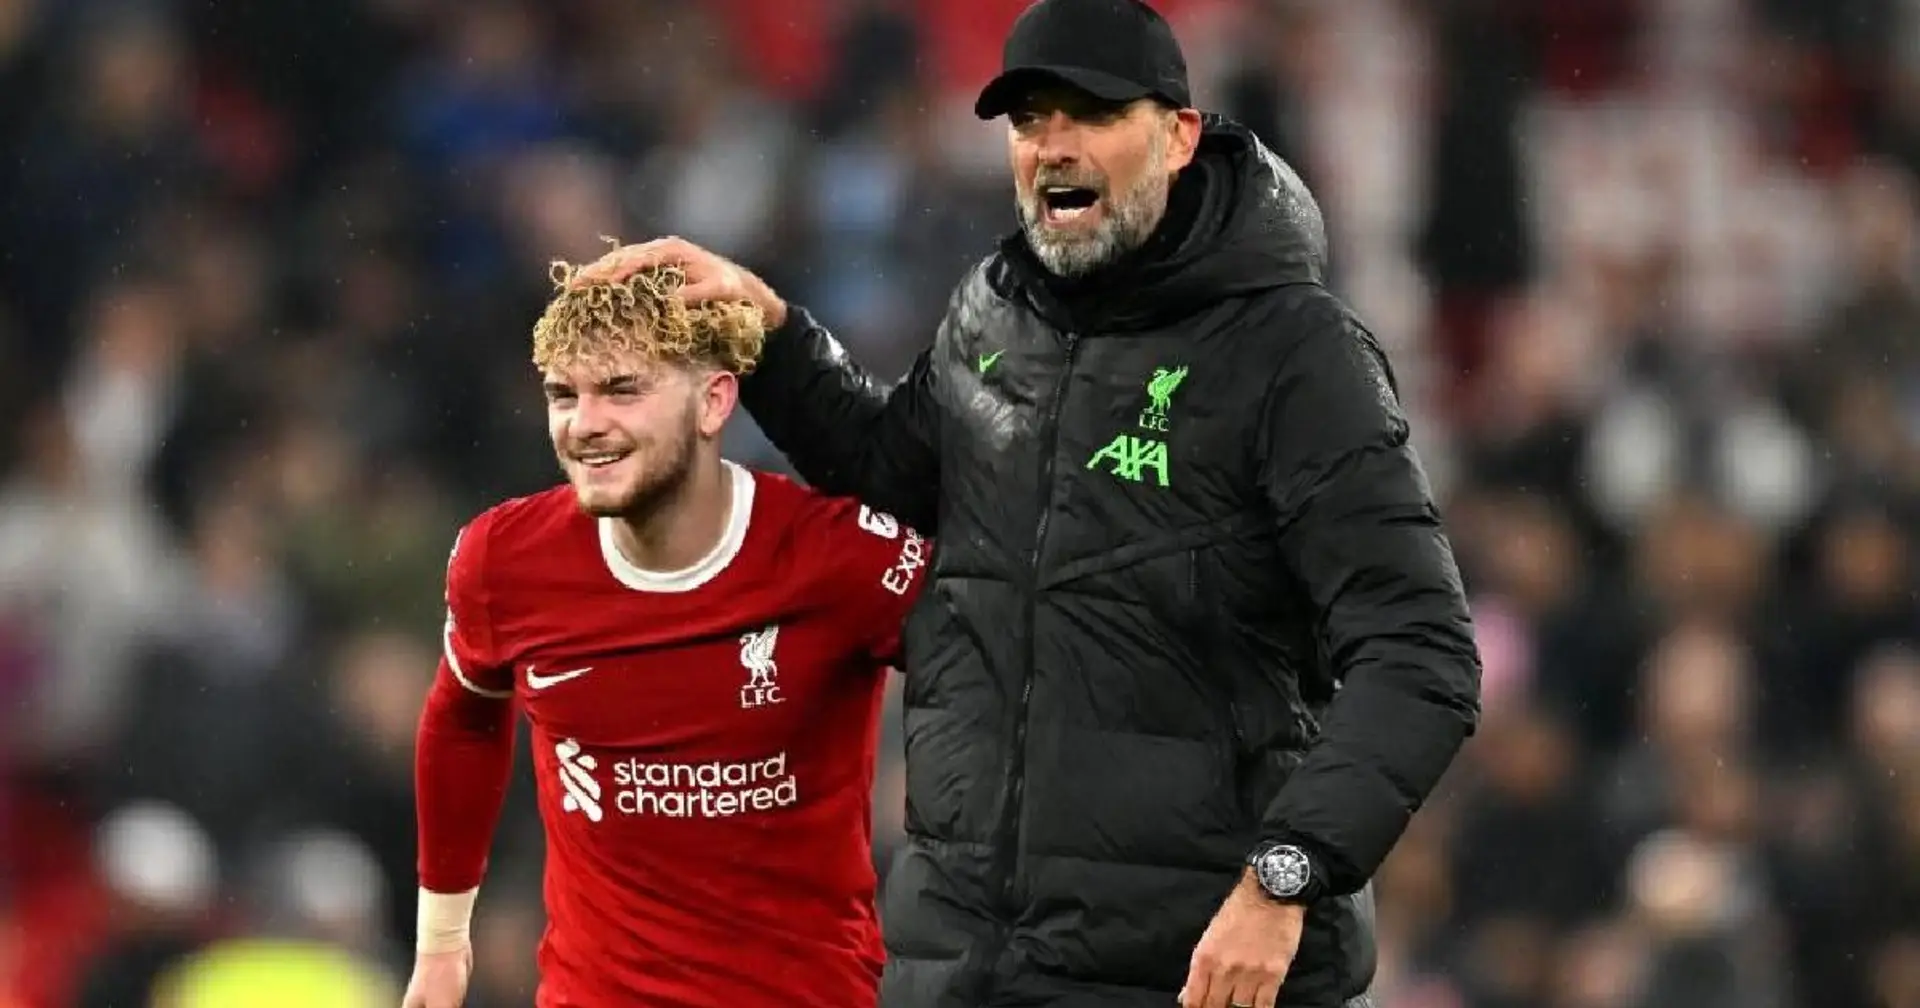 'There’s one man who deserves that in this world': Elliott on what he expects in Klopp's final Liverpool game